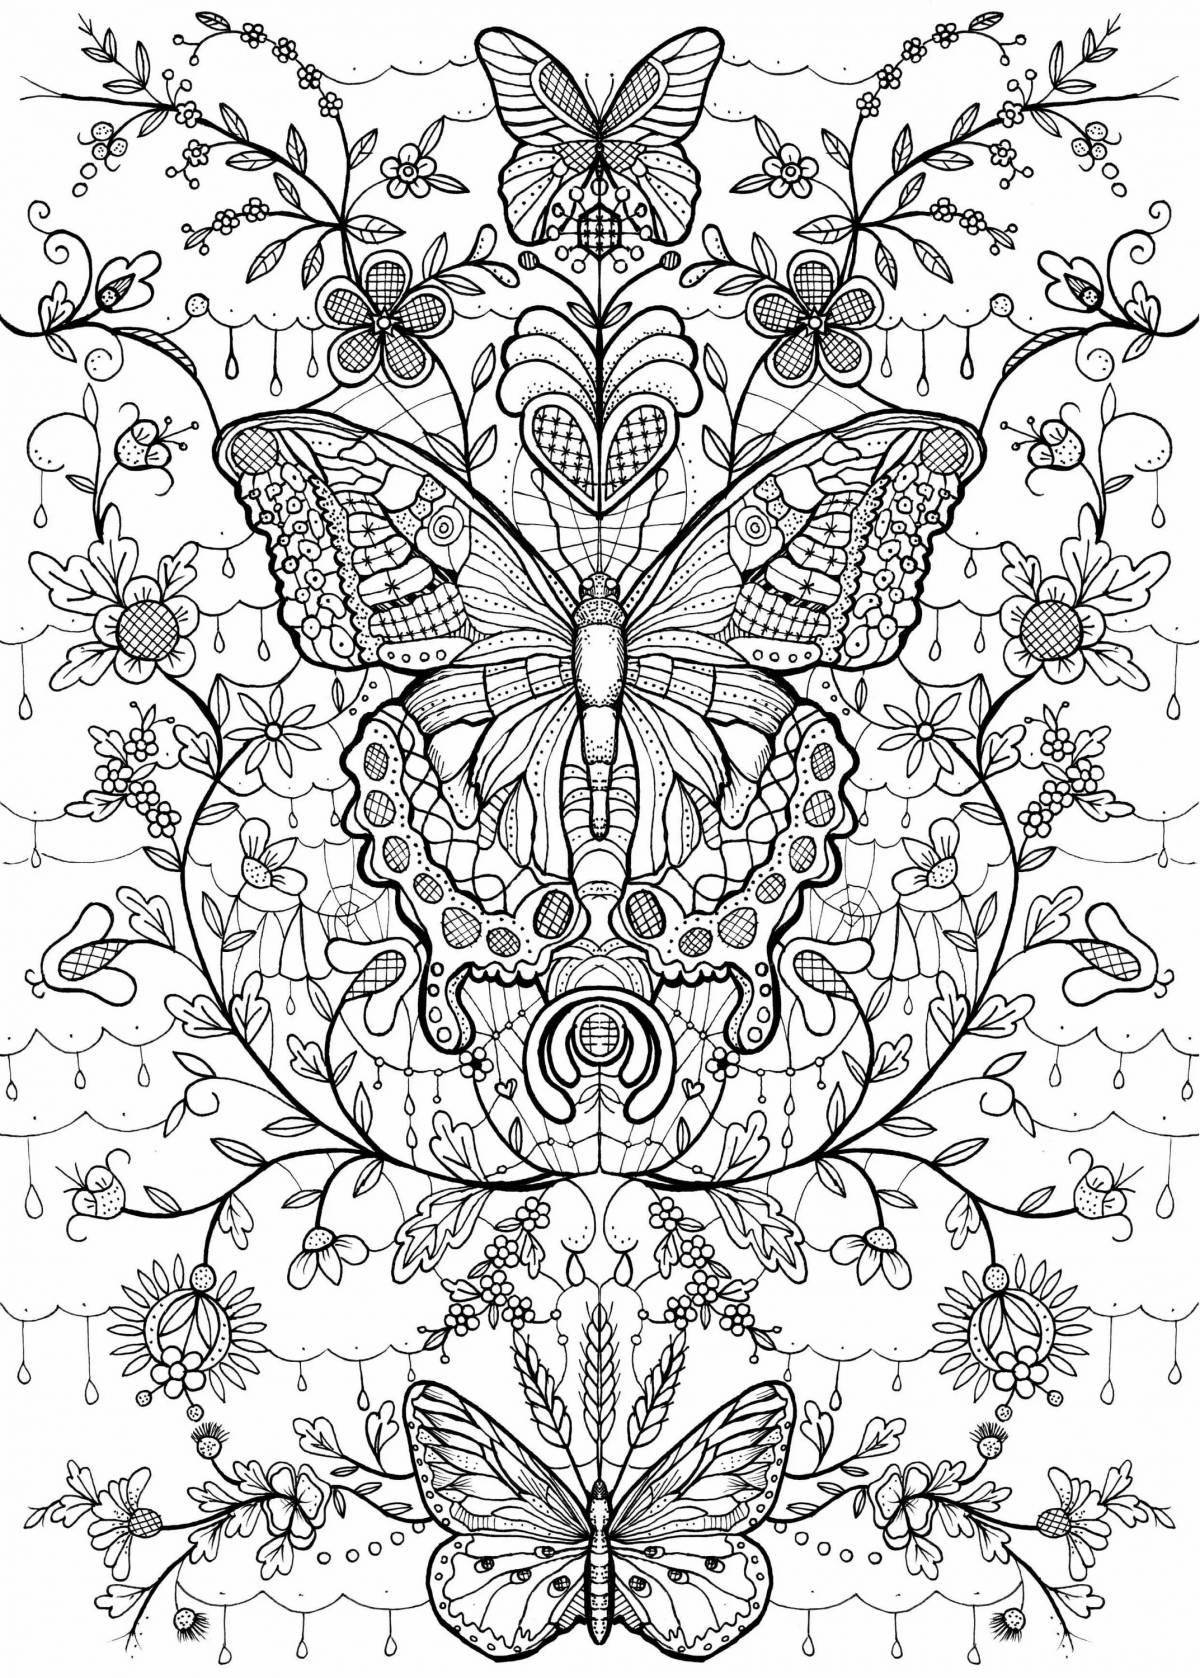 Exquisite butterfly coloring book